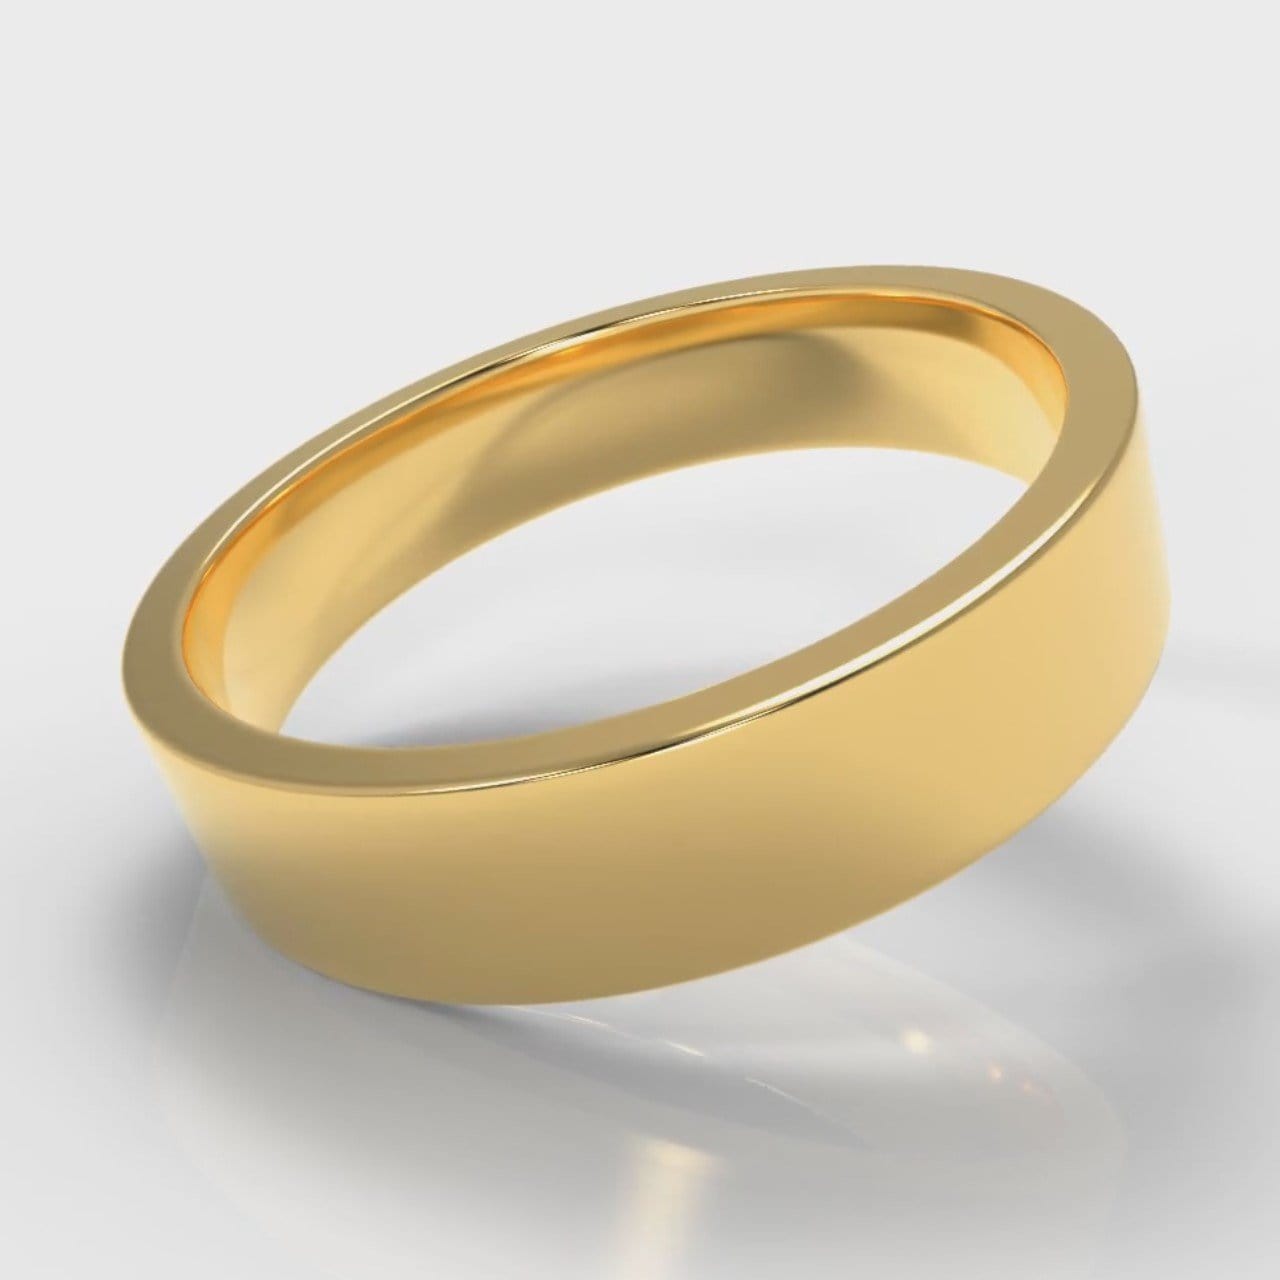 5mm Flat Top Comfort Fit Wedding Ring - Yellow Gold